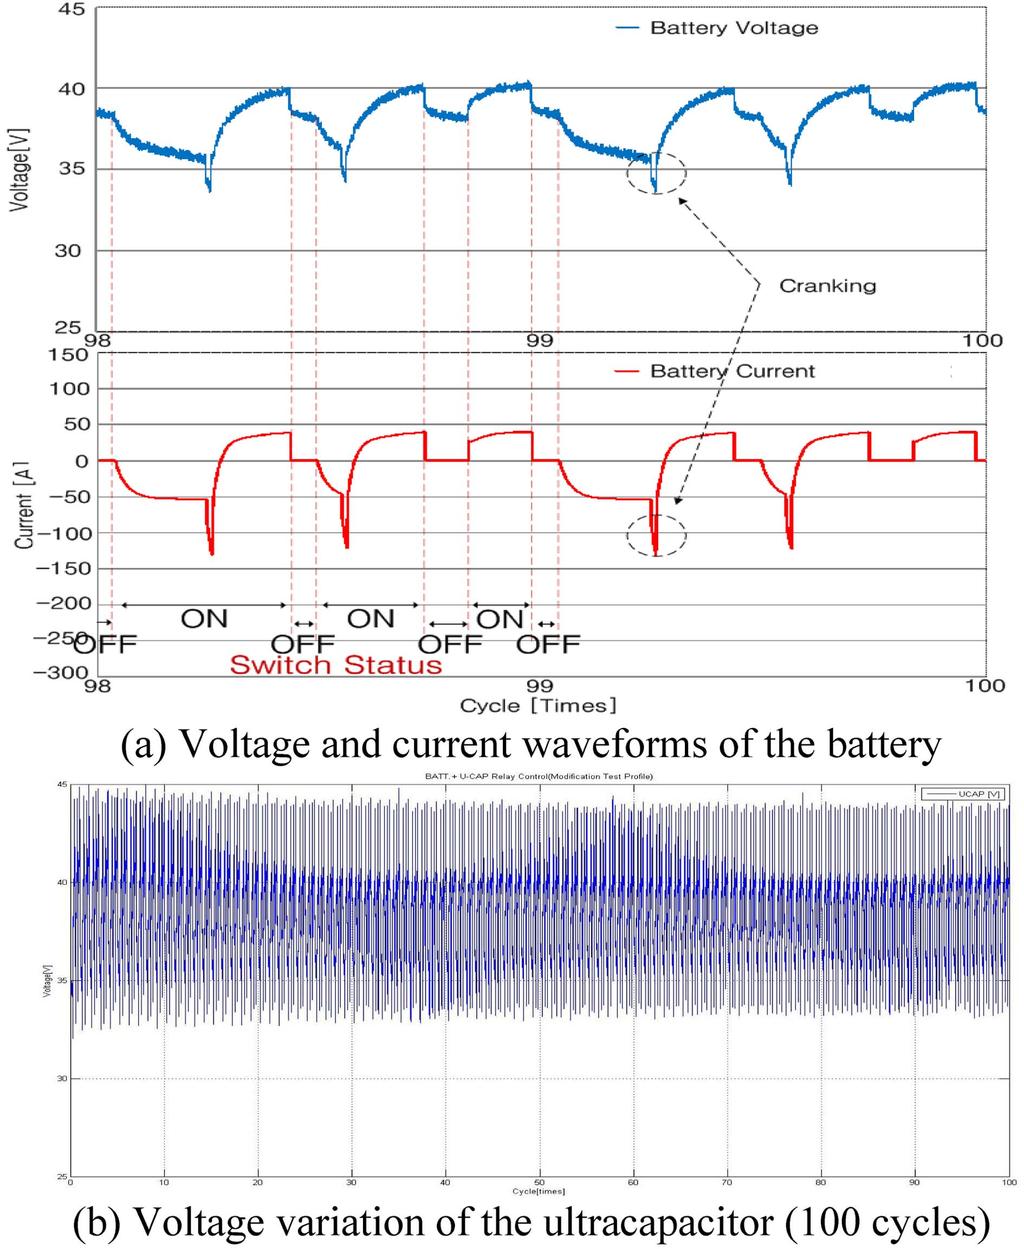 ADVANCED HYBRID ENERGY STORAGE SYSTEM FOR MILD HYBRID ELECTRIC VEHICLES 129 Figure 10. Cycle test results of the advanced HESS. tion and advanced HESS with BMS) were performed.